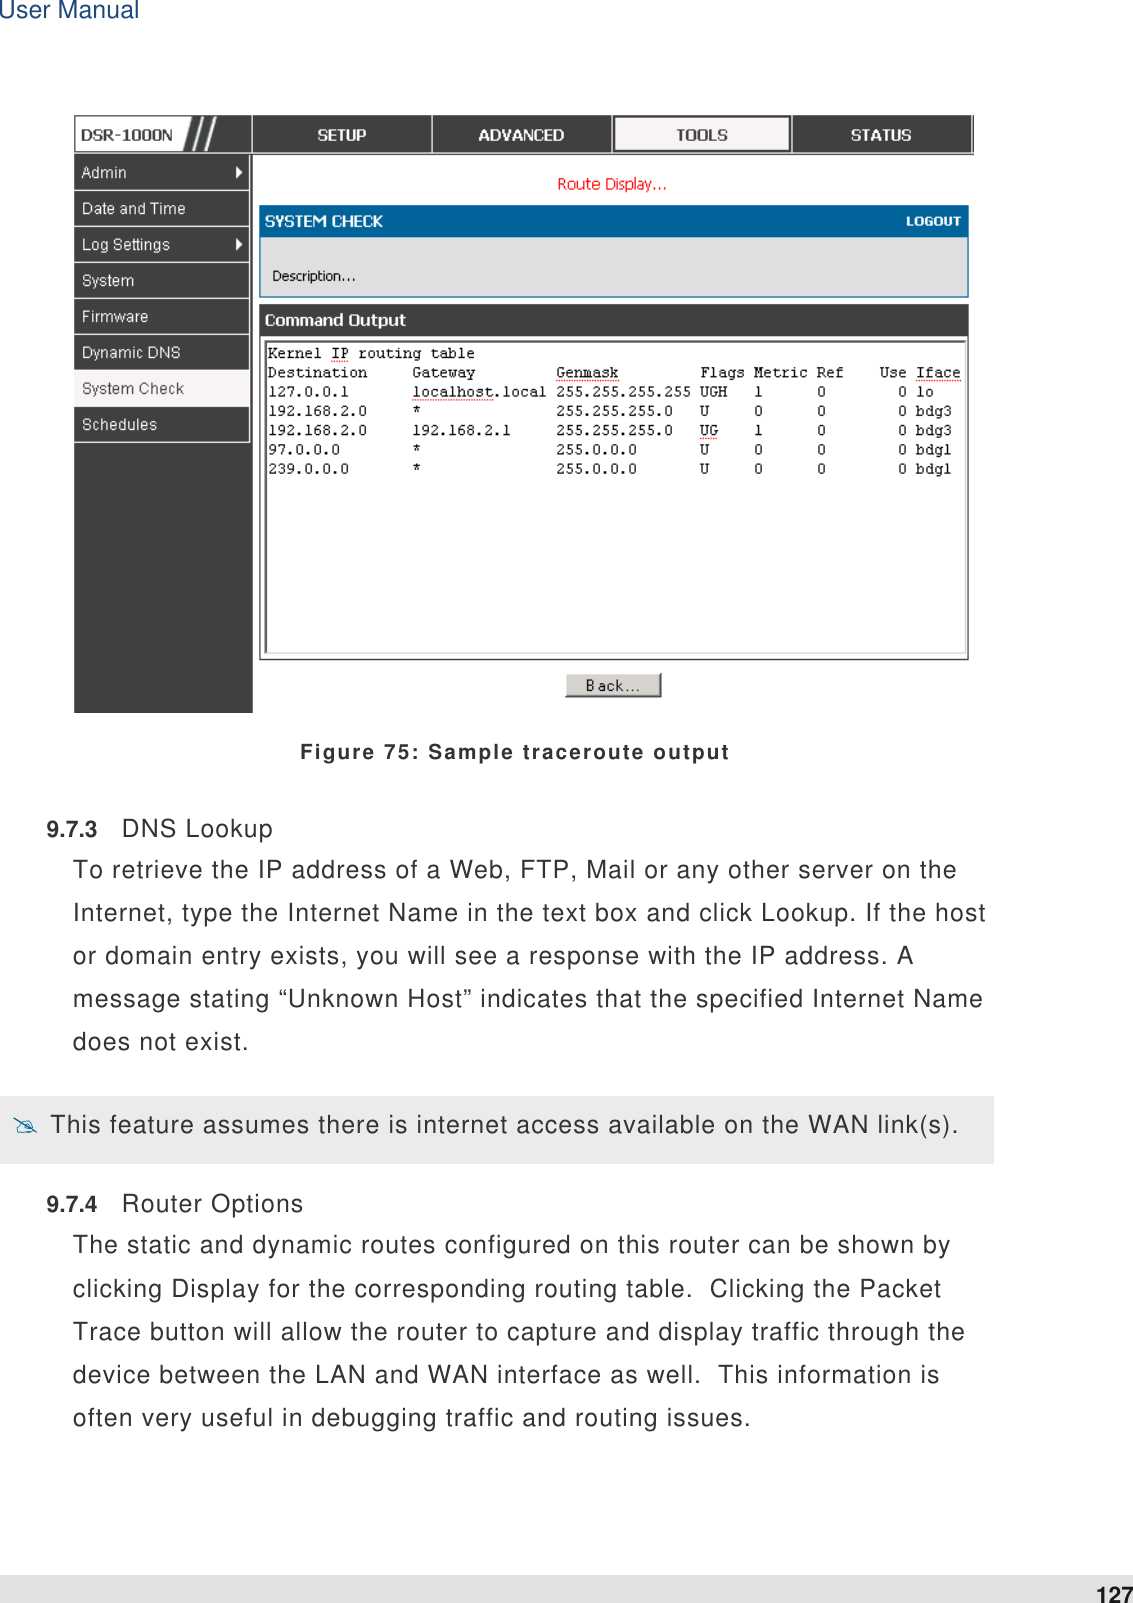 User Manual 127    Figure 75: Sample traceroute output 9.7.3  DNS Lookup To retrieve the IP address of a Web, FTP, Mail or any other server on the Internet, type the Internet Name in the text box and click Lookup. If the host or domain entry exists, you will see a response with the IP address. A message stating “Unknown Host” indicates that the specified Internet Name does not exist.  This feature assumes there is internet access available on the WAN link(s). 9.7.4  Router Options The static and dynamic routes configured on this router can be shown by clicking Display for the corresponding routing table.  Clicking the Packet Trace button will allow the router to capture and display traffic through the device between the LAN and WAN interface as well.  This information is often very useful in debugging traffic and routing issues.  